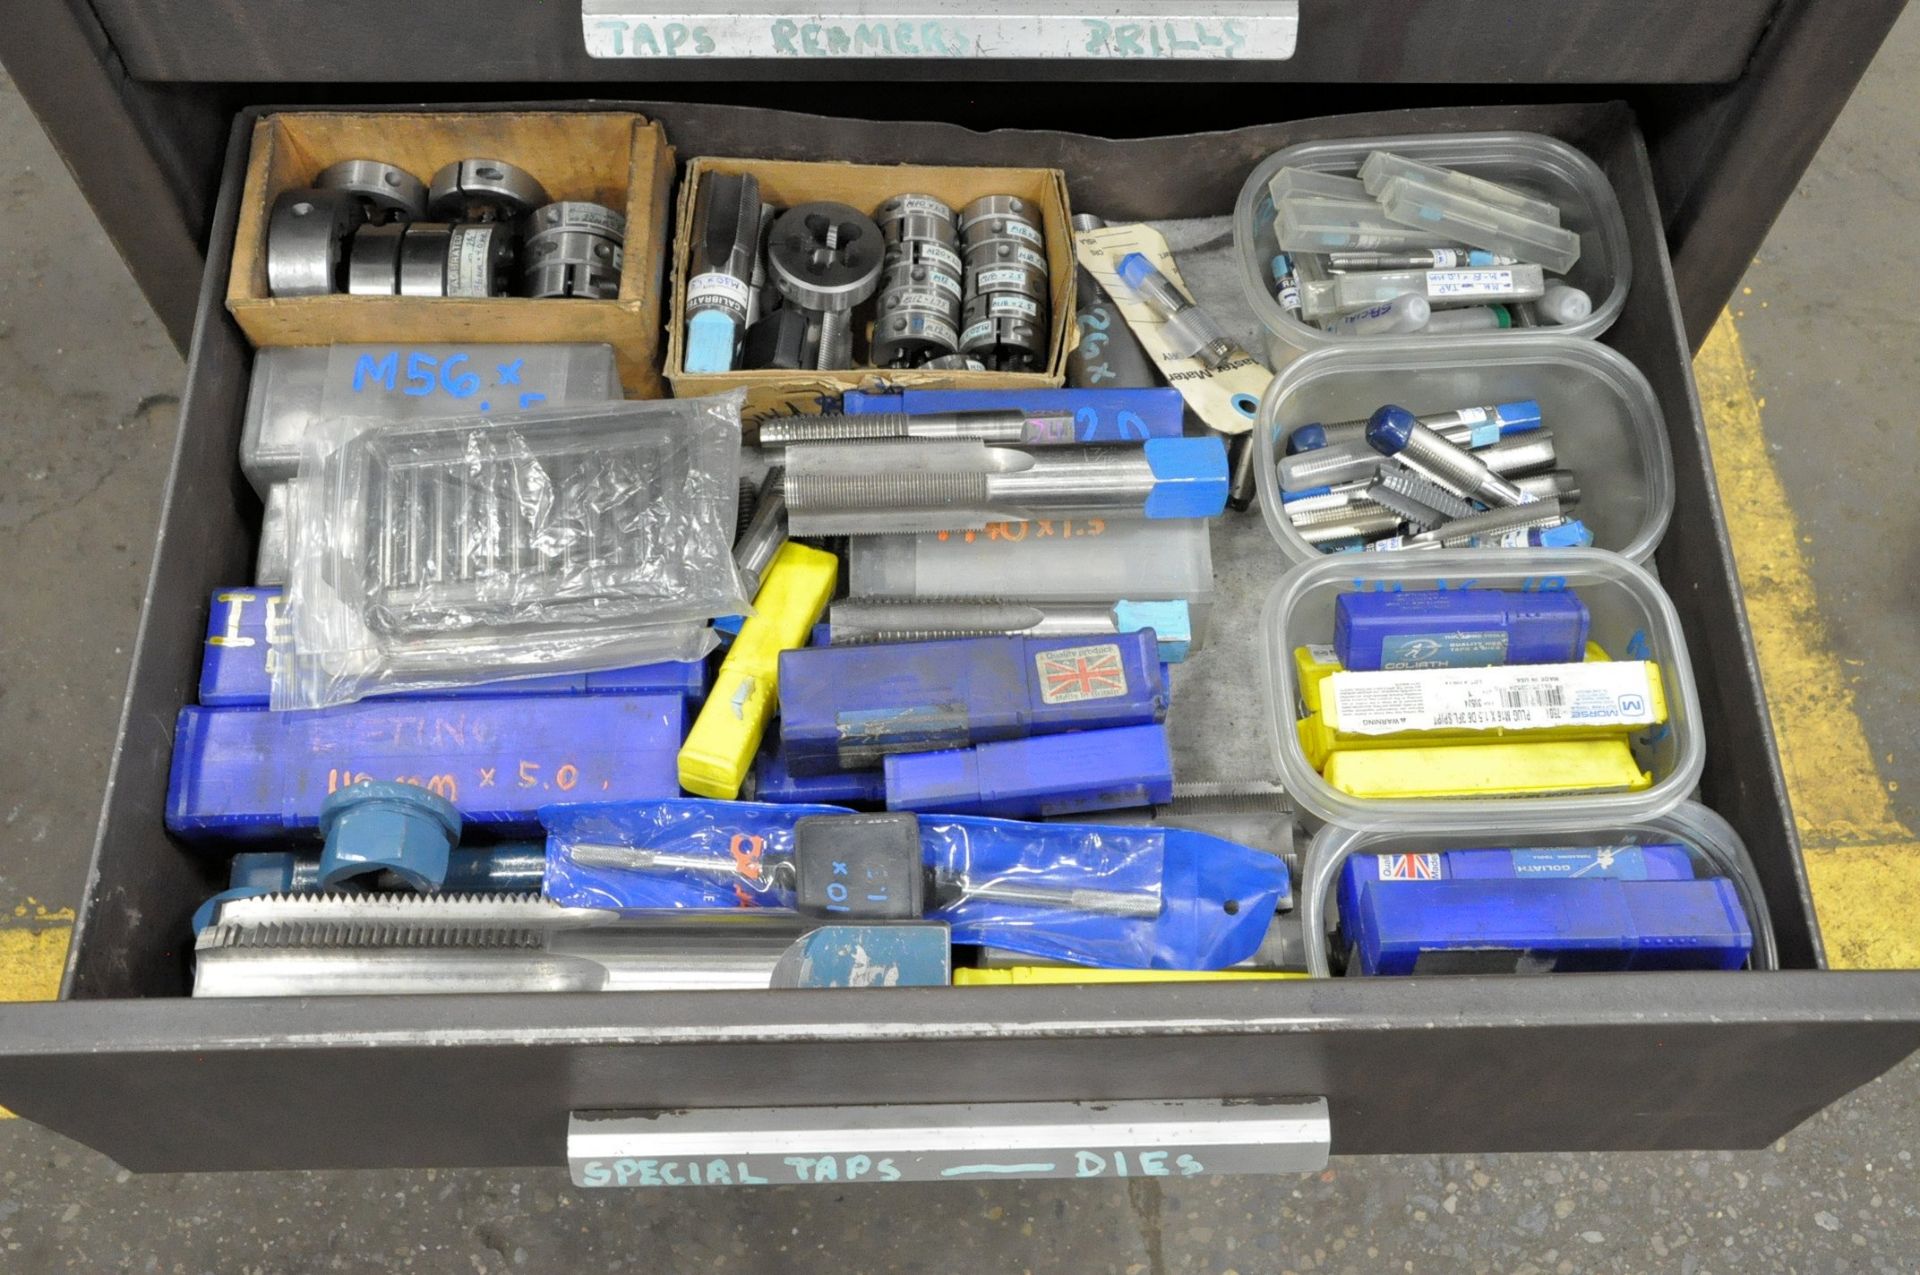 Kennedy 3-Drawer Rolling Tool Box with Asst'd Cutters Contents, (E-7), (Yellow Tag) - Image 4 of 4